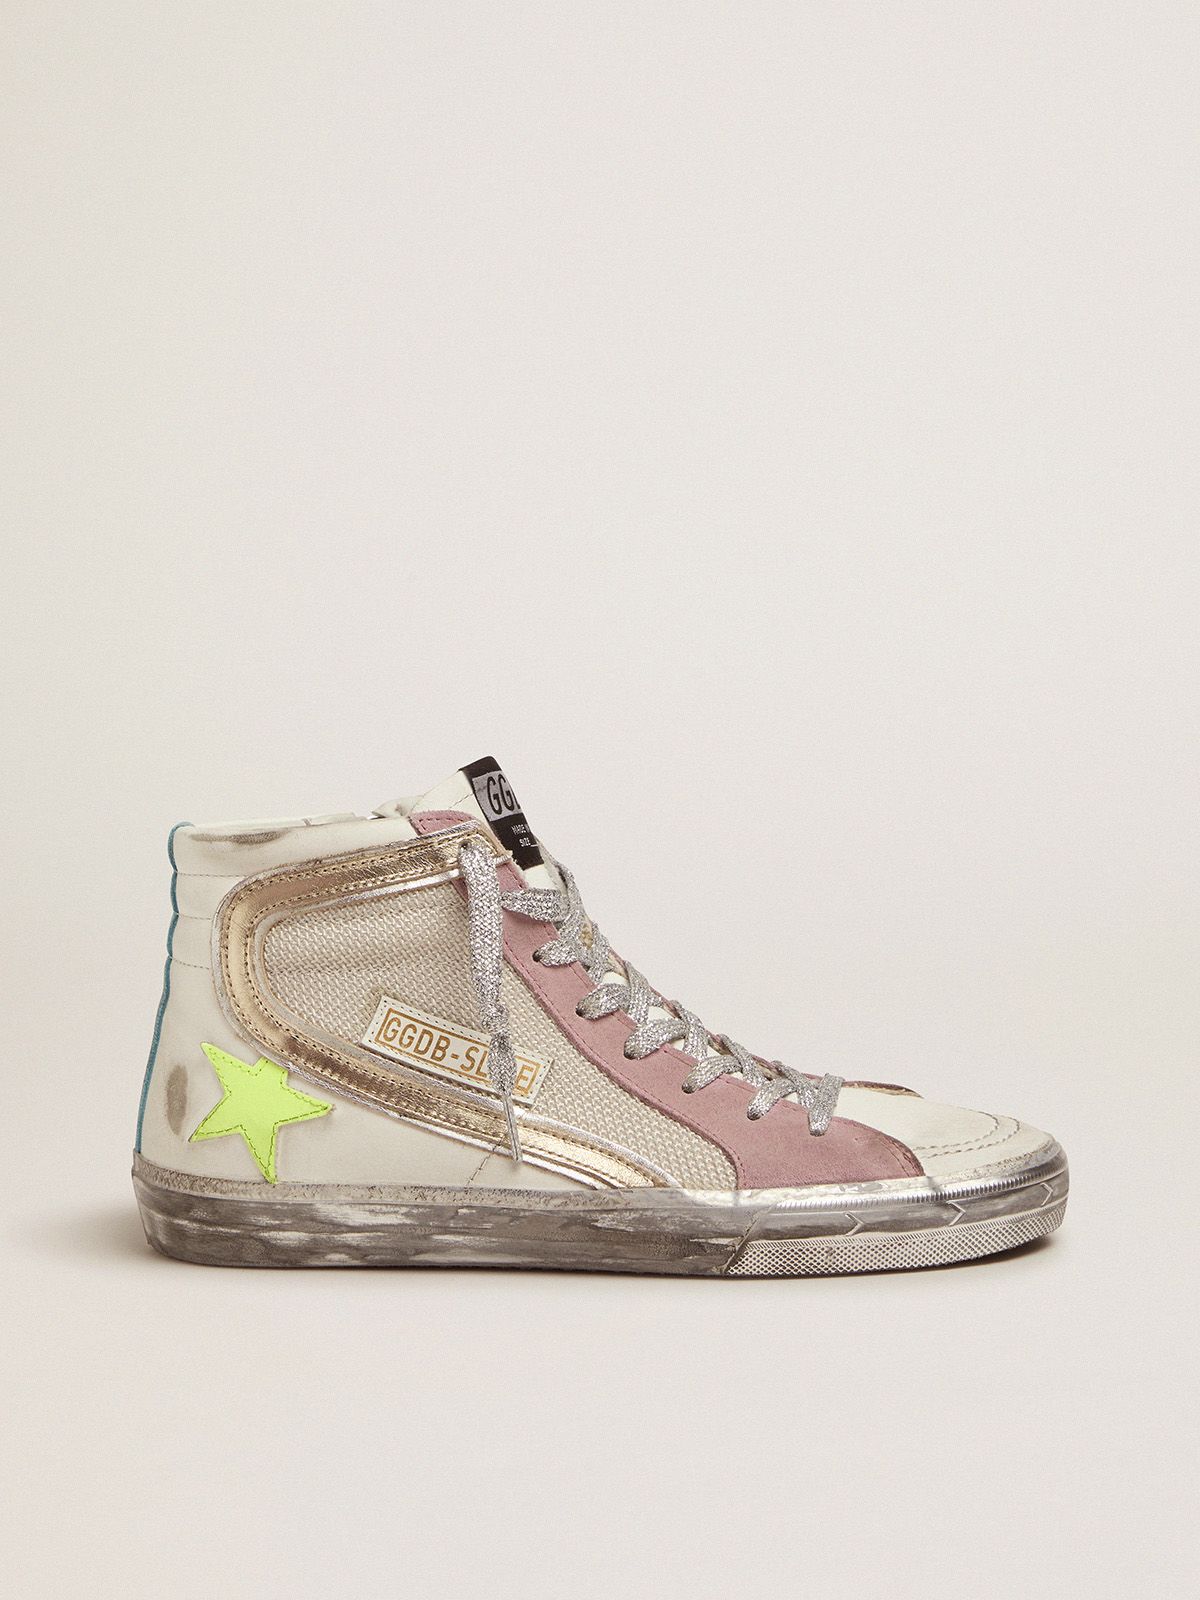 golden goose with white pink Slide upper and sneakers